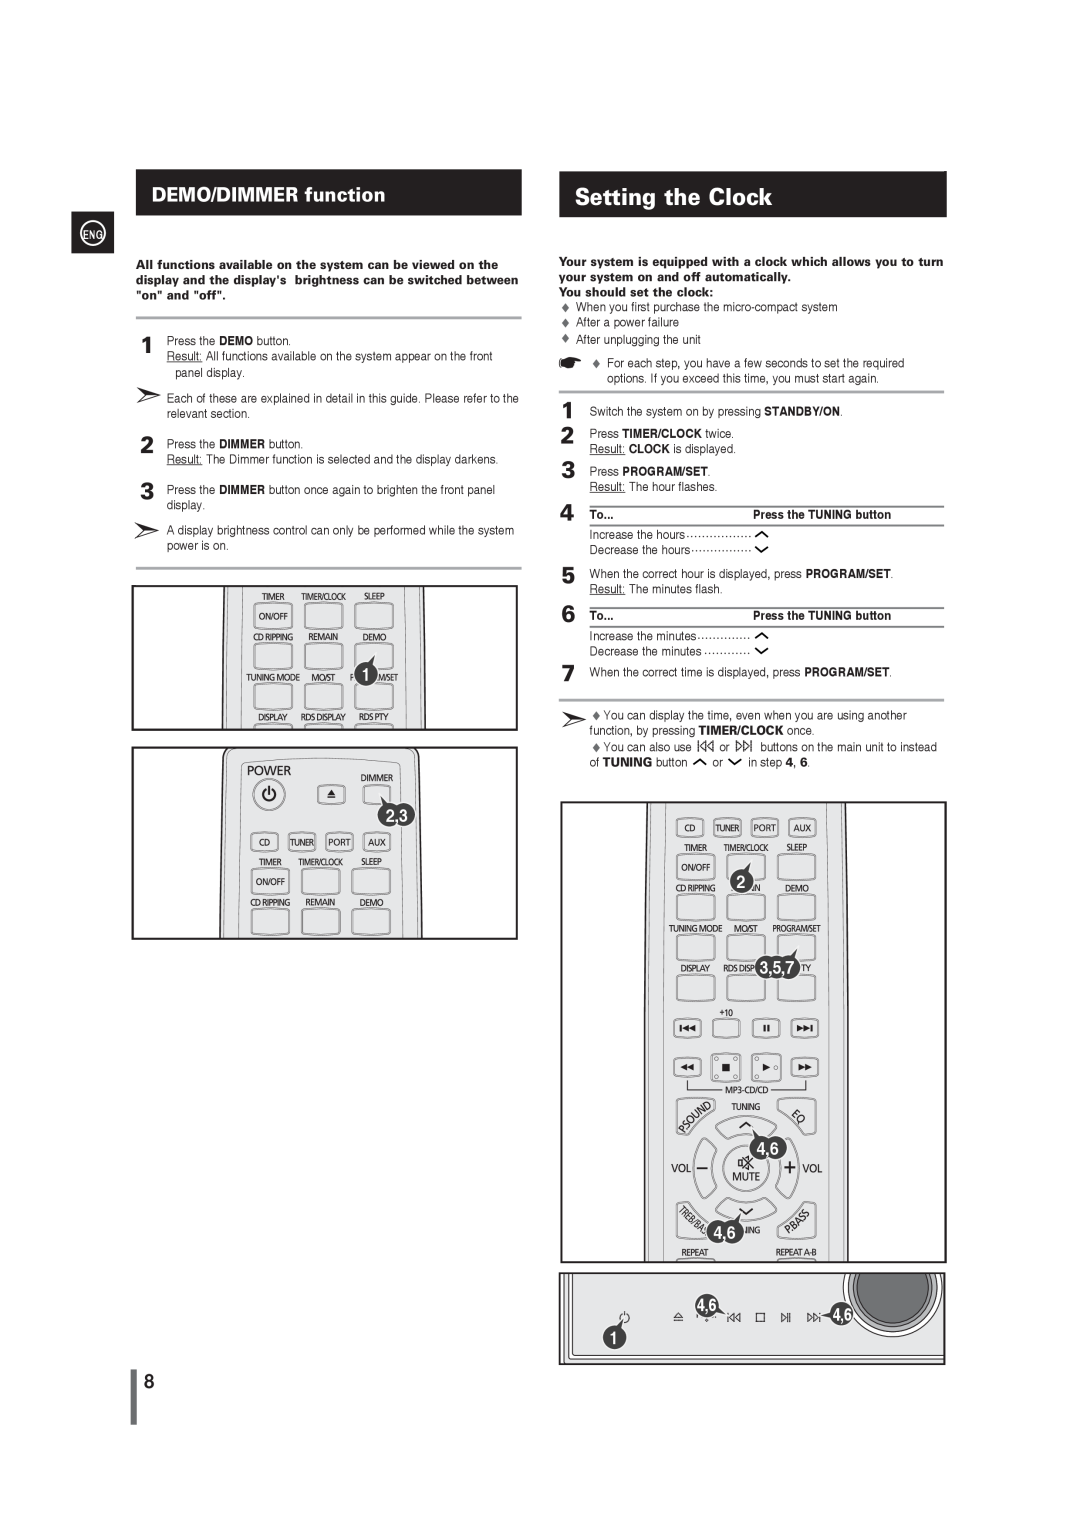 Samsung MM-G35 user manual Setting the Clock, DEMO/DIMMER function, 1 2,3, 2 3,5,7 4,6 4,6 4,64,6 